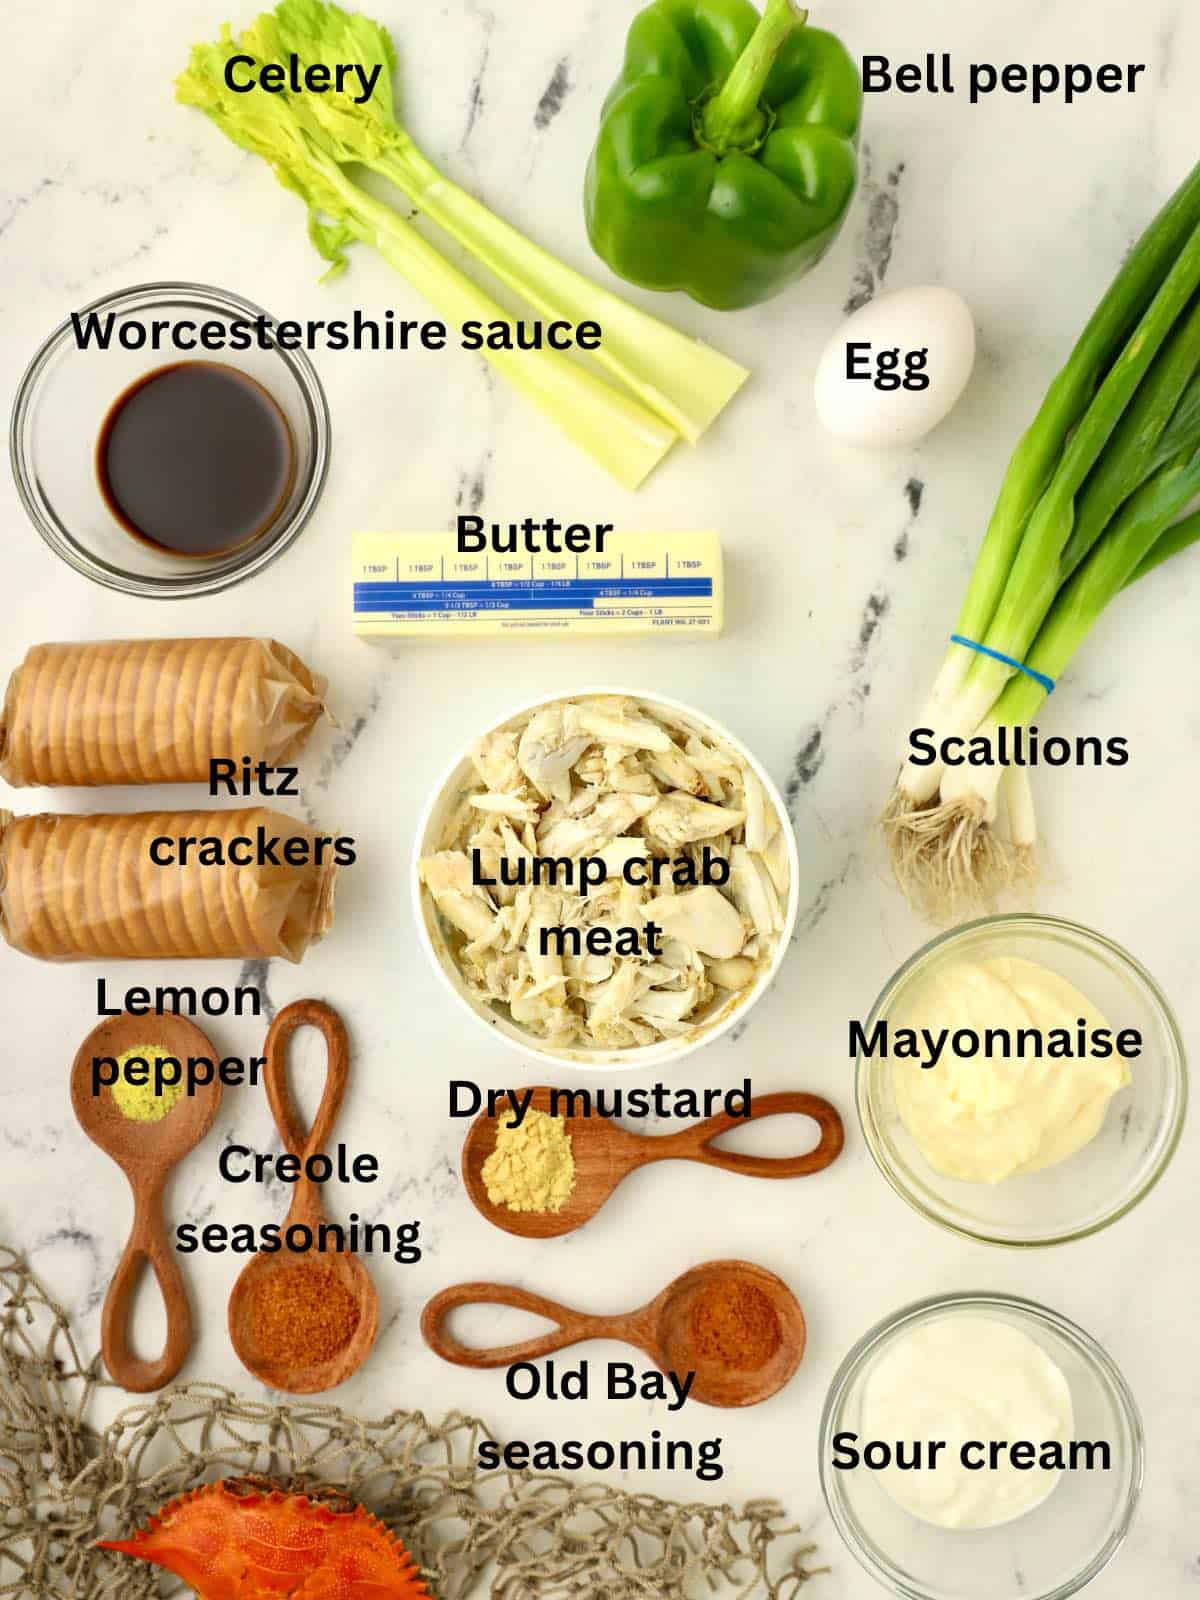 Ingredients for deviled crab include crab meat, Ritz crackers, celery, and Old Bay seasoning. 